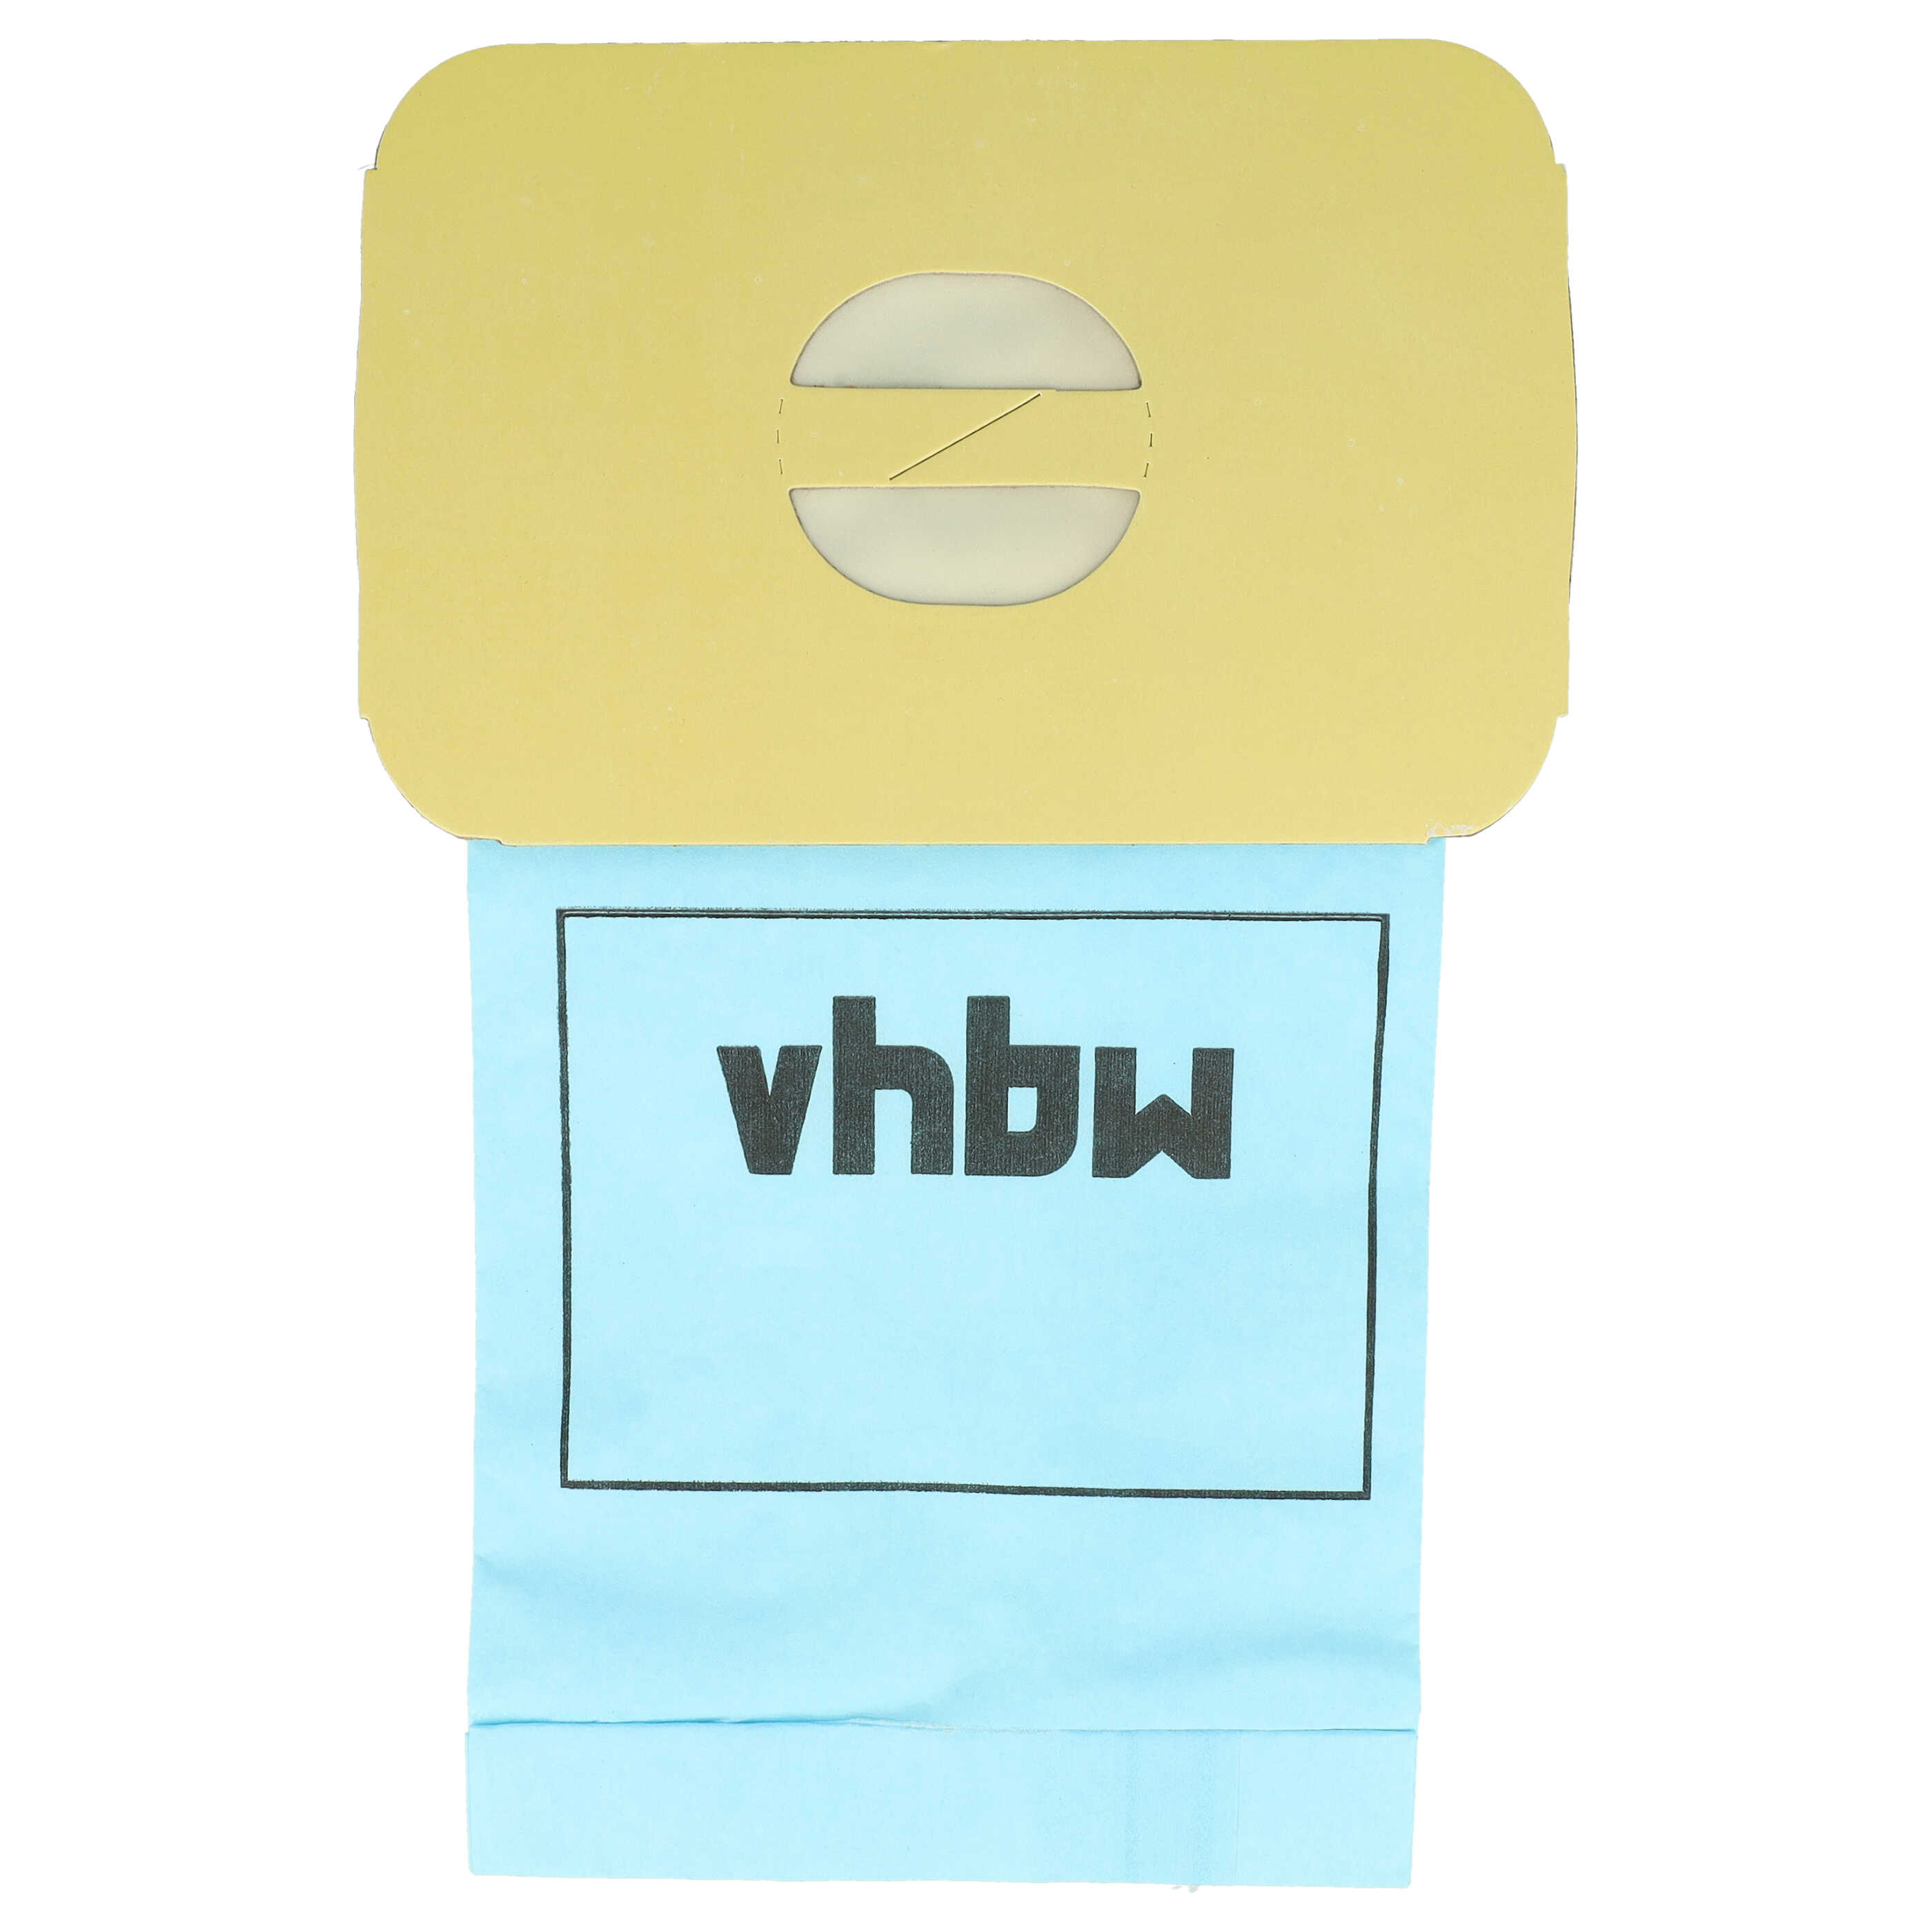 10x Vacuum Cleaner Bag suitable for Lux D710 - paper